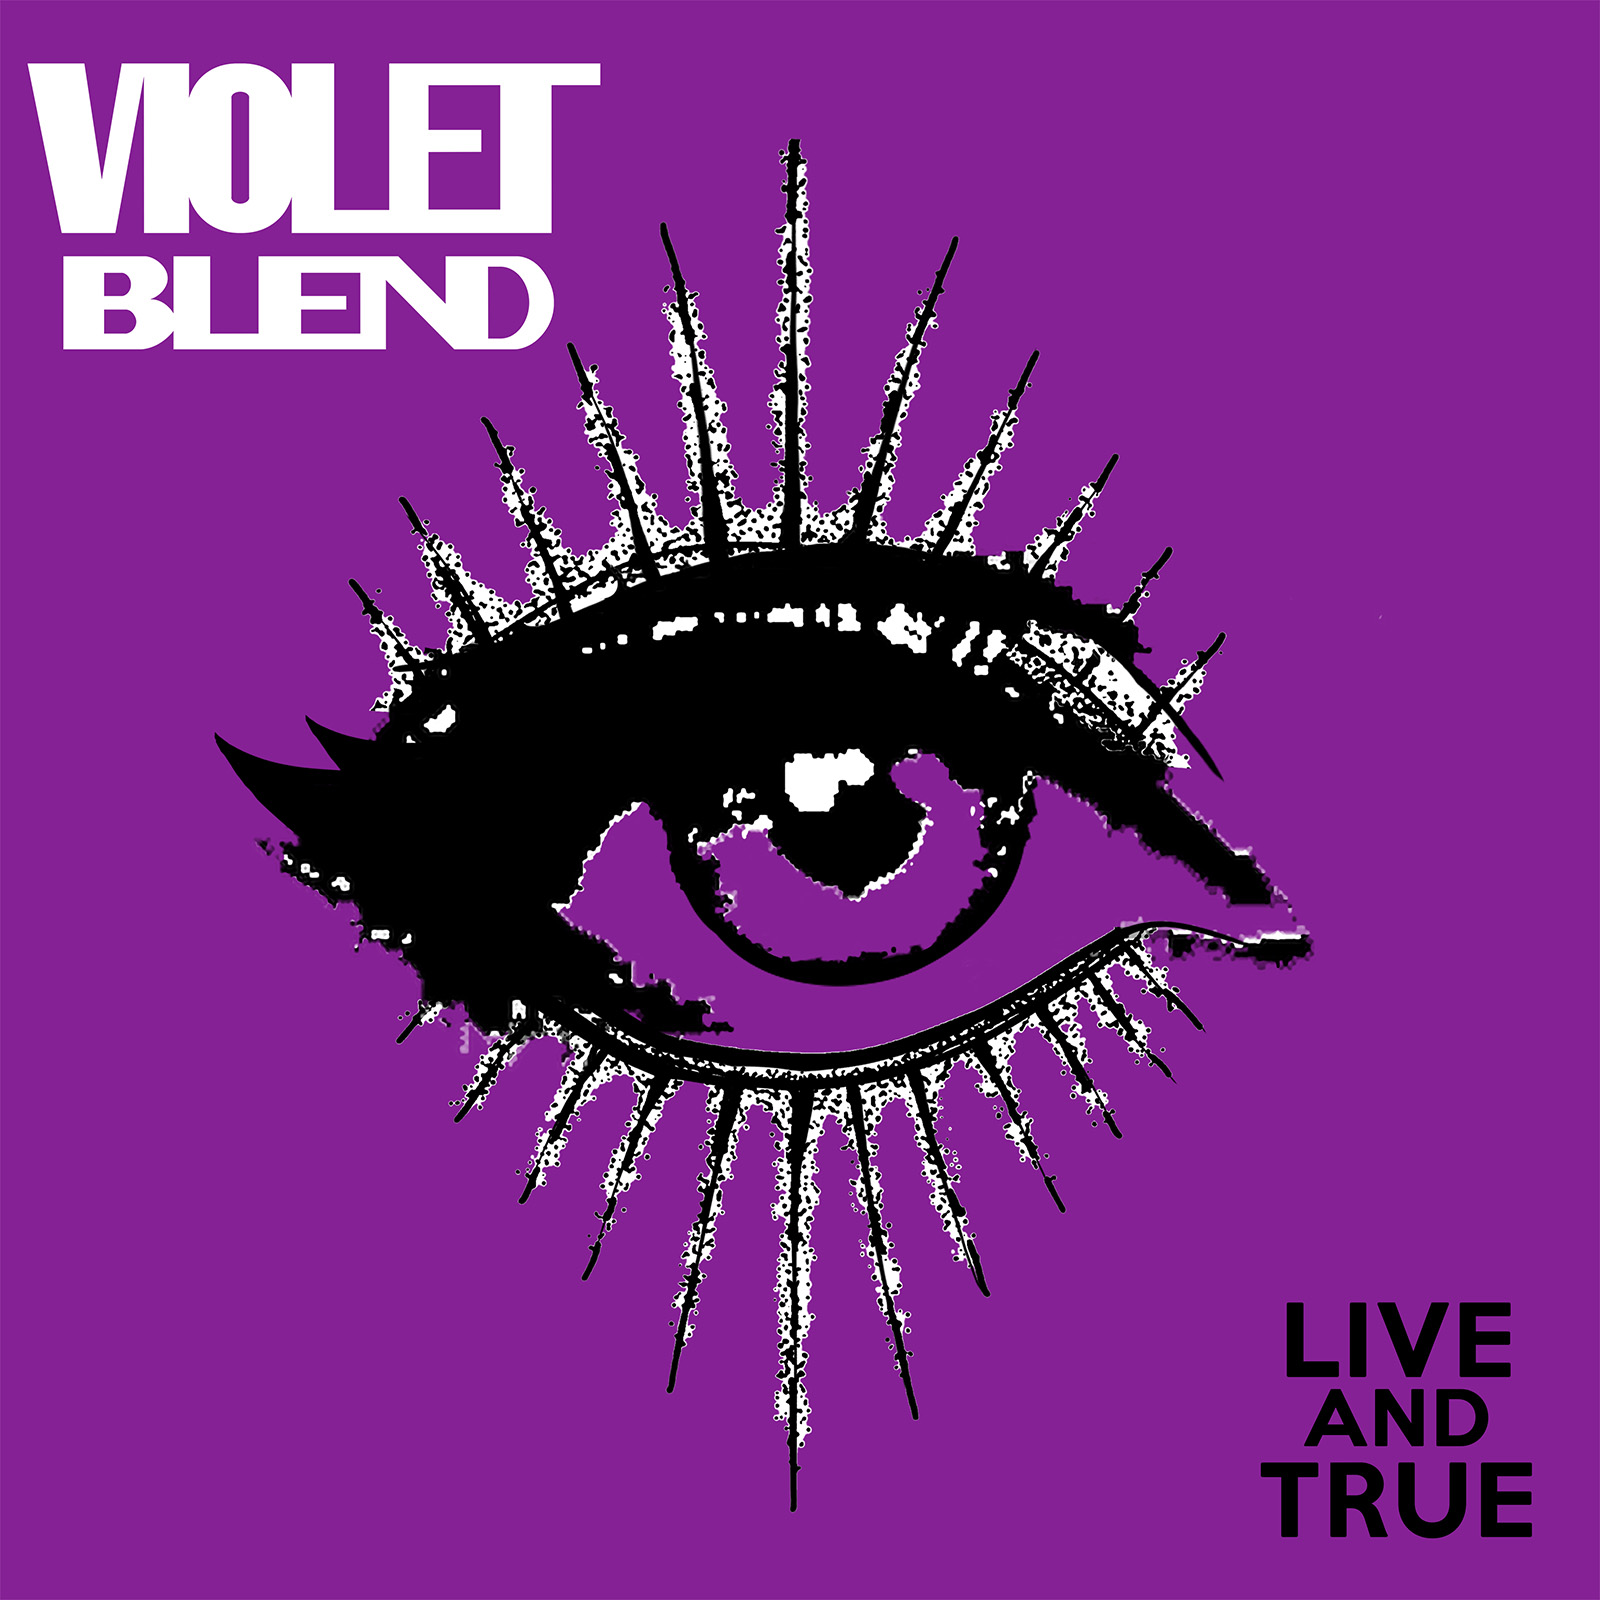 ALBUM REVIEW: Live and True by Violet Blend